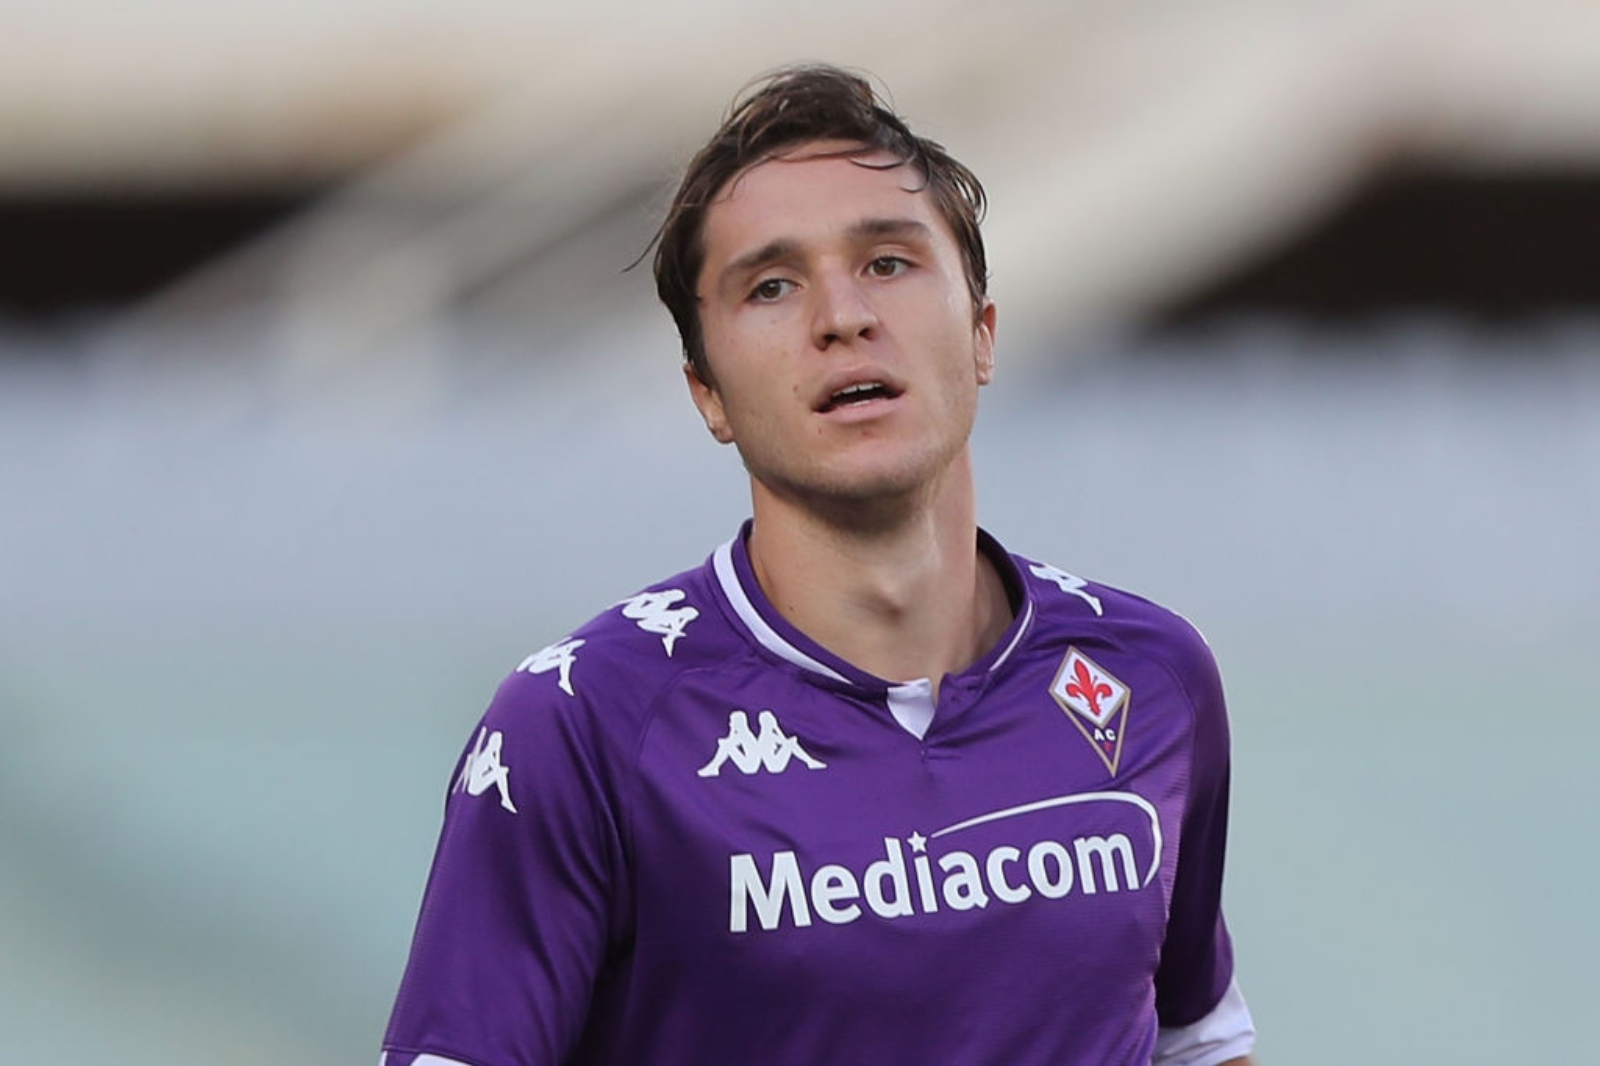 Milan seem close to pull off the signing of Federico Chiesa seemingly out of nowhere